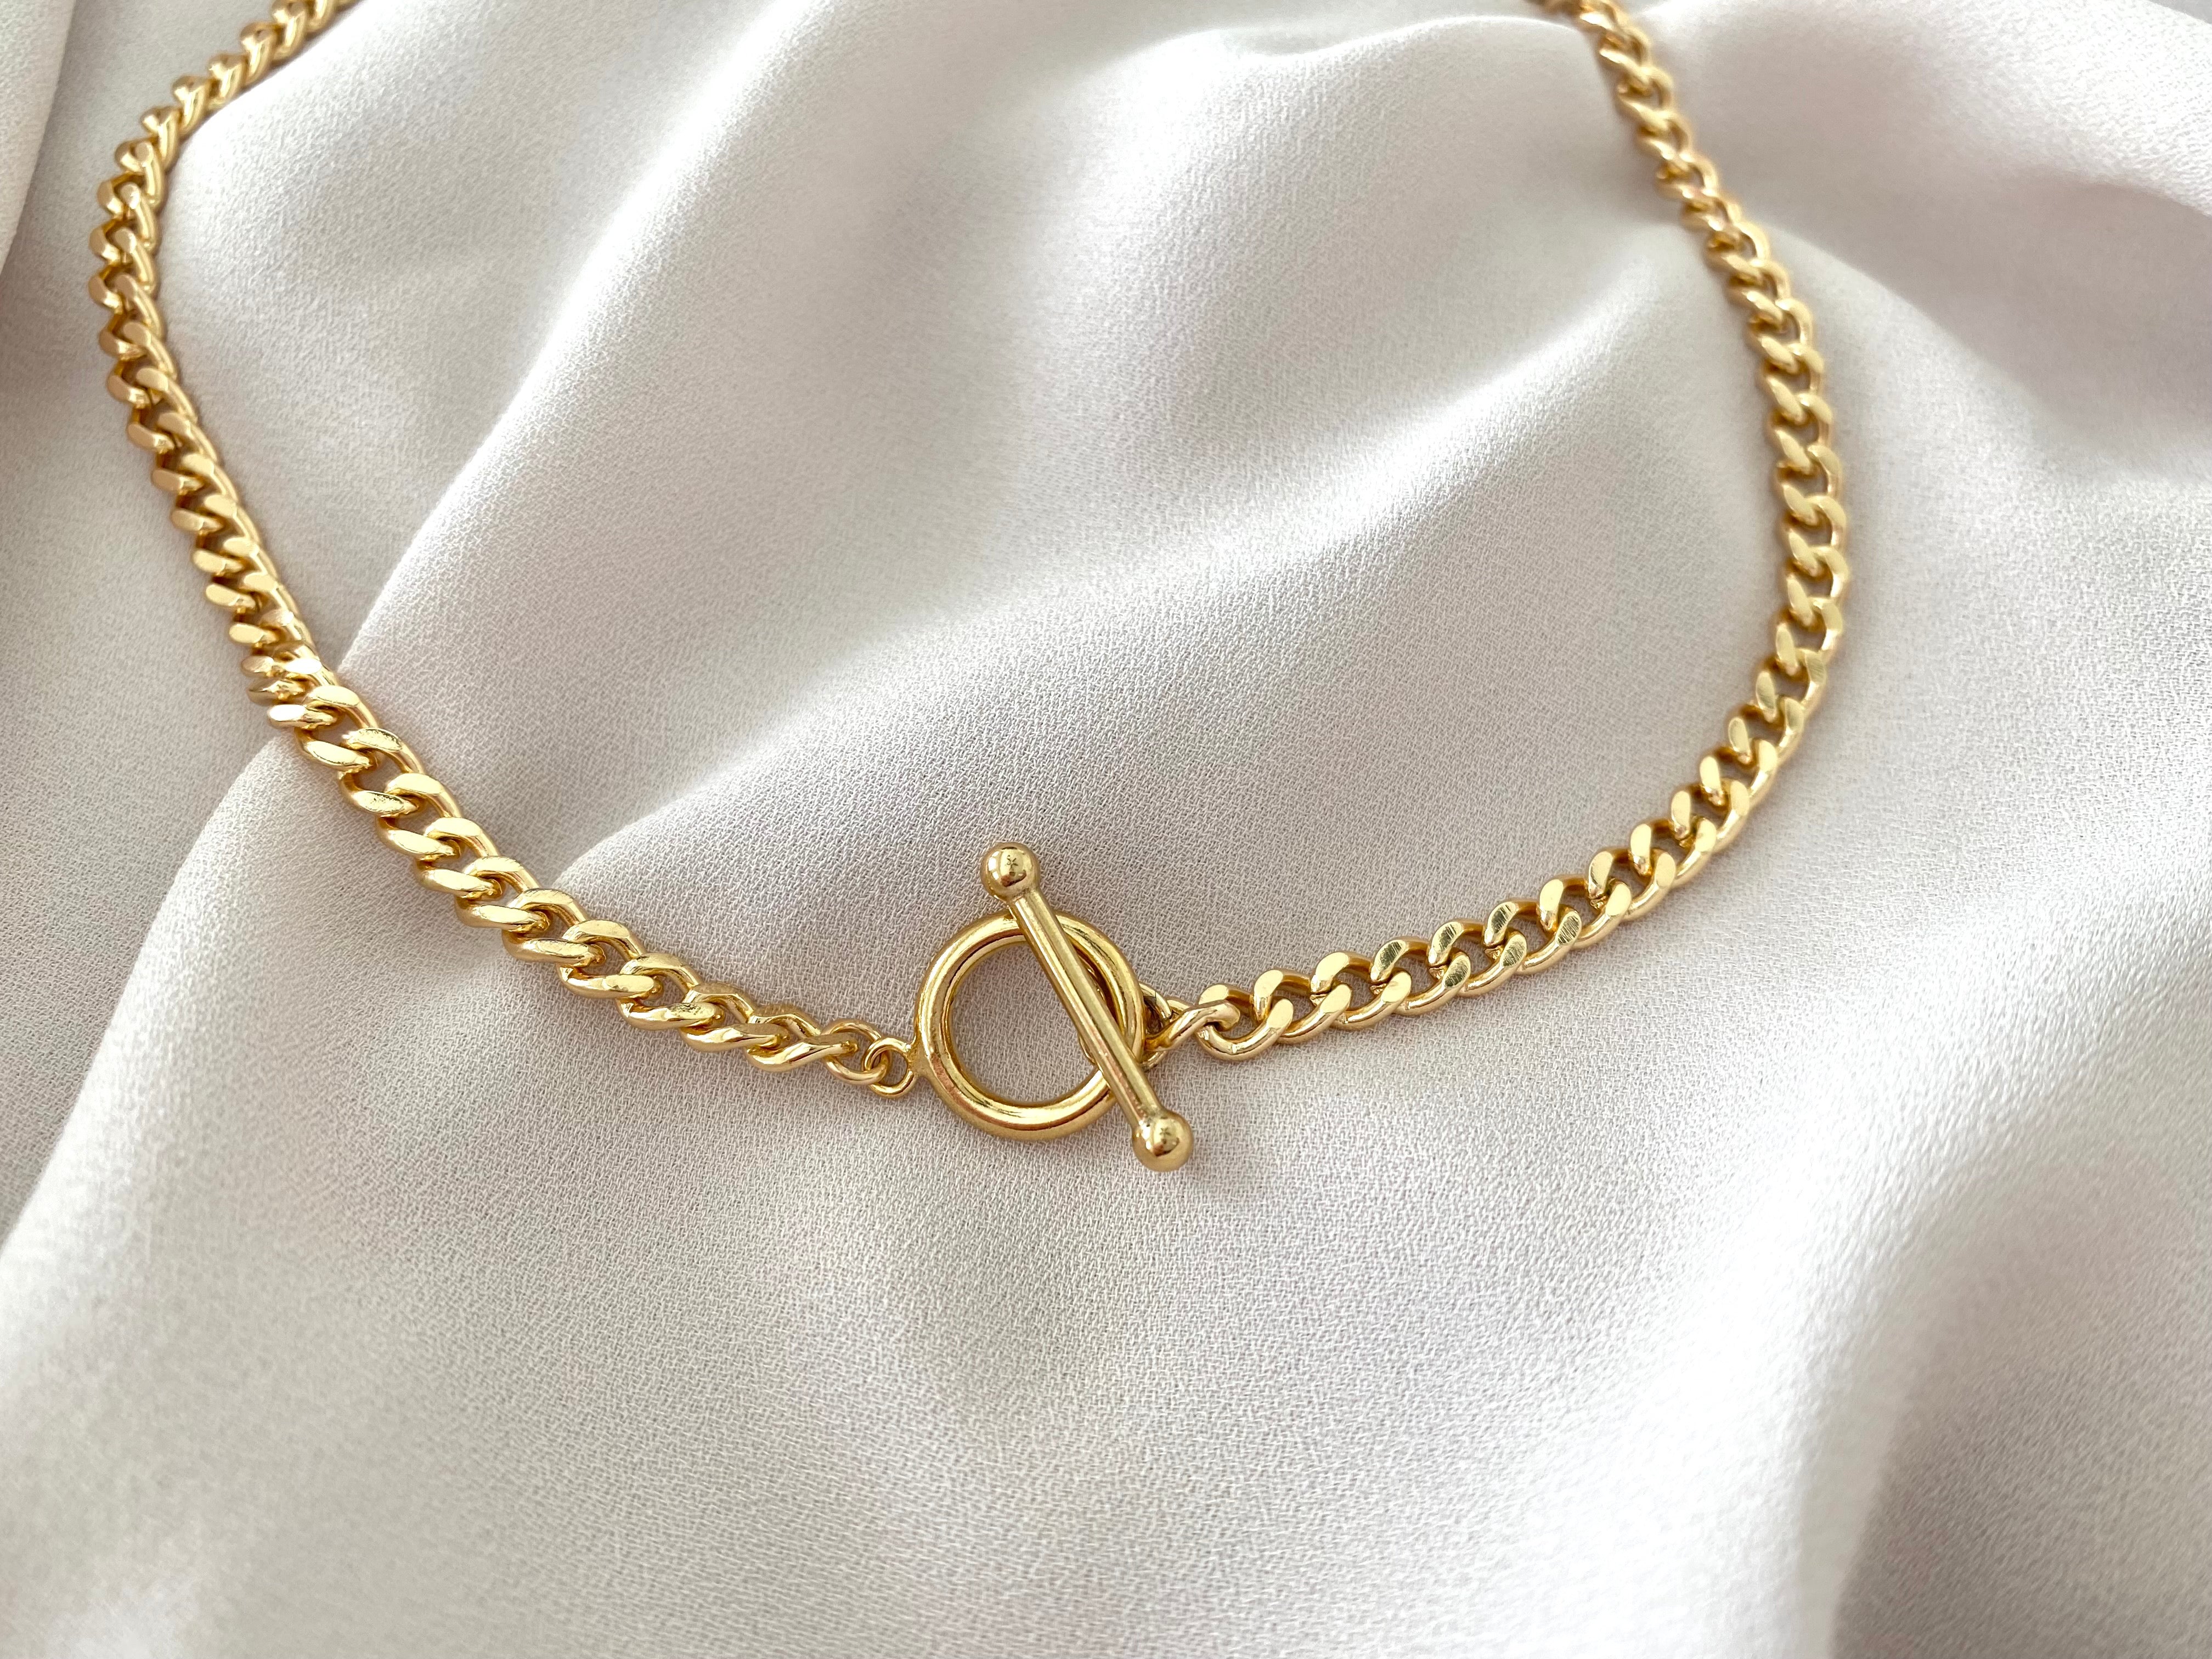 Foxgirl Gold Necklace 18k Gold Plated Dainty Square India | Ubuy